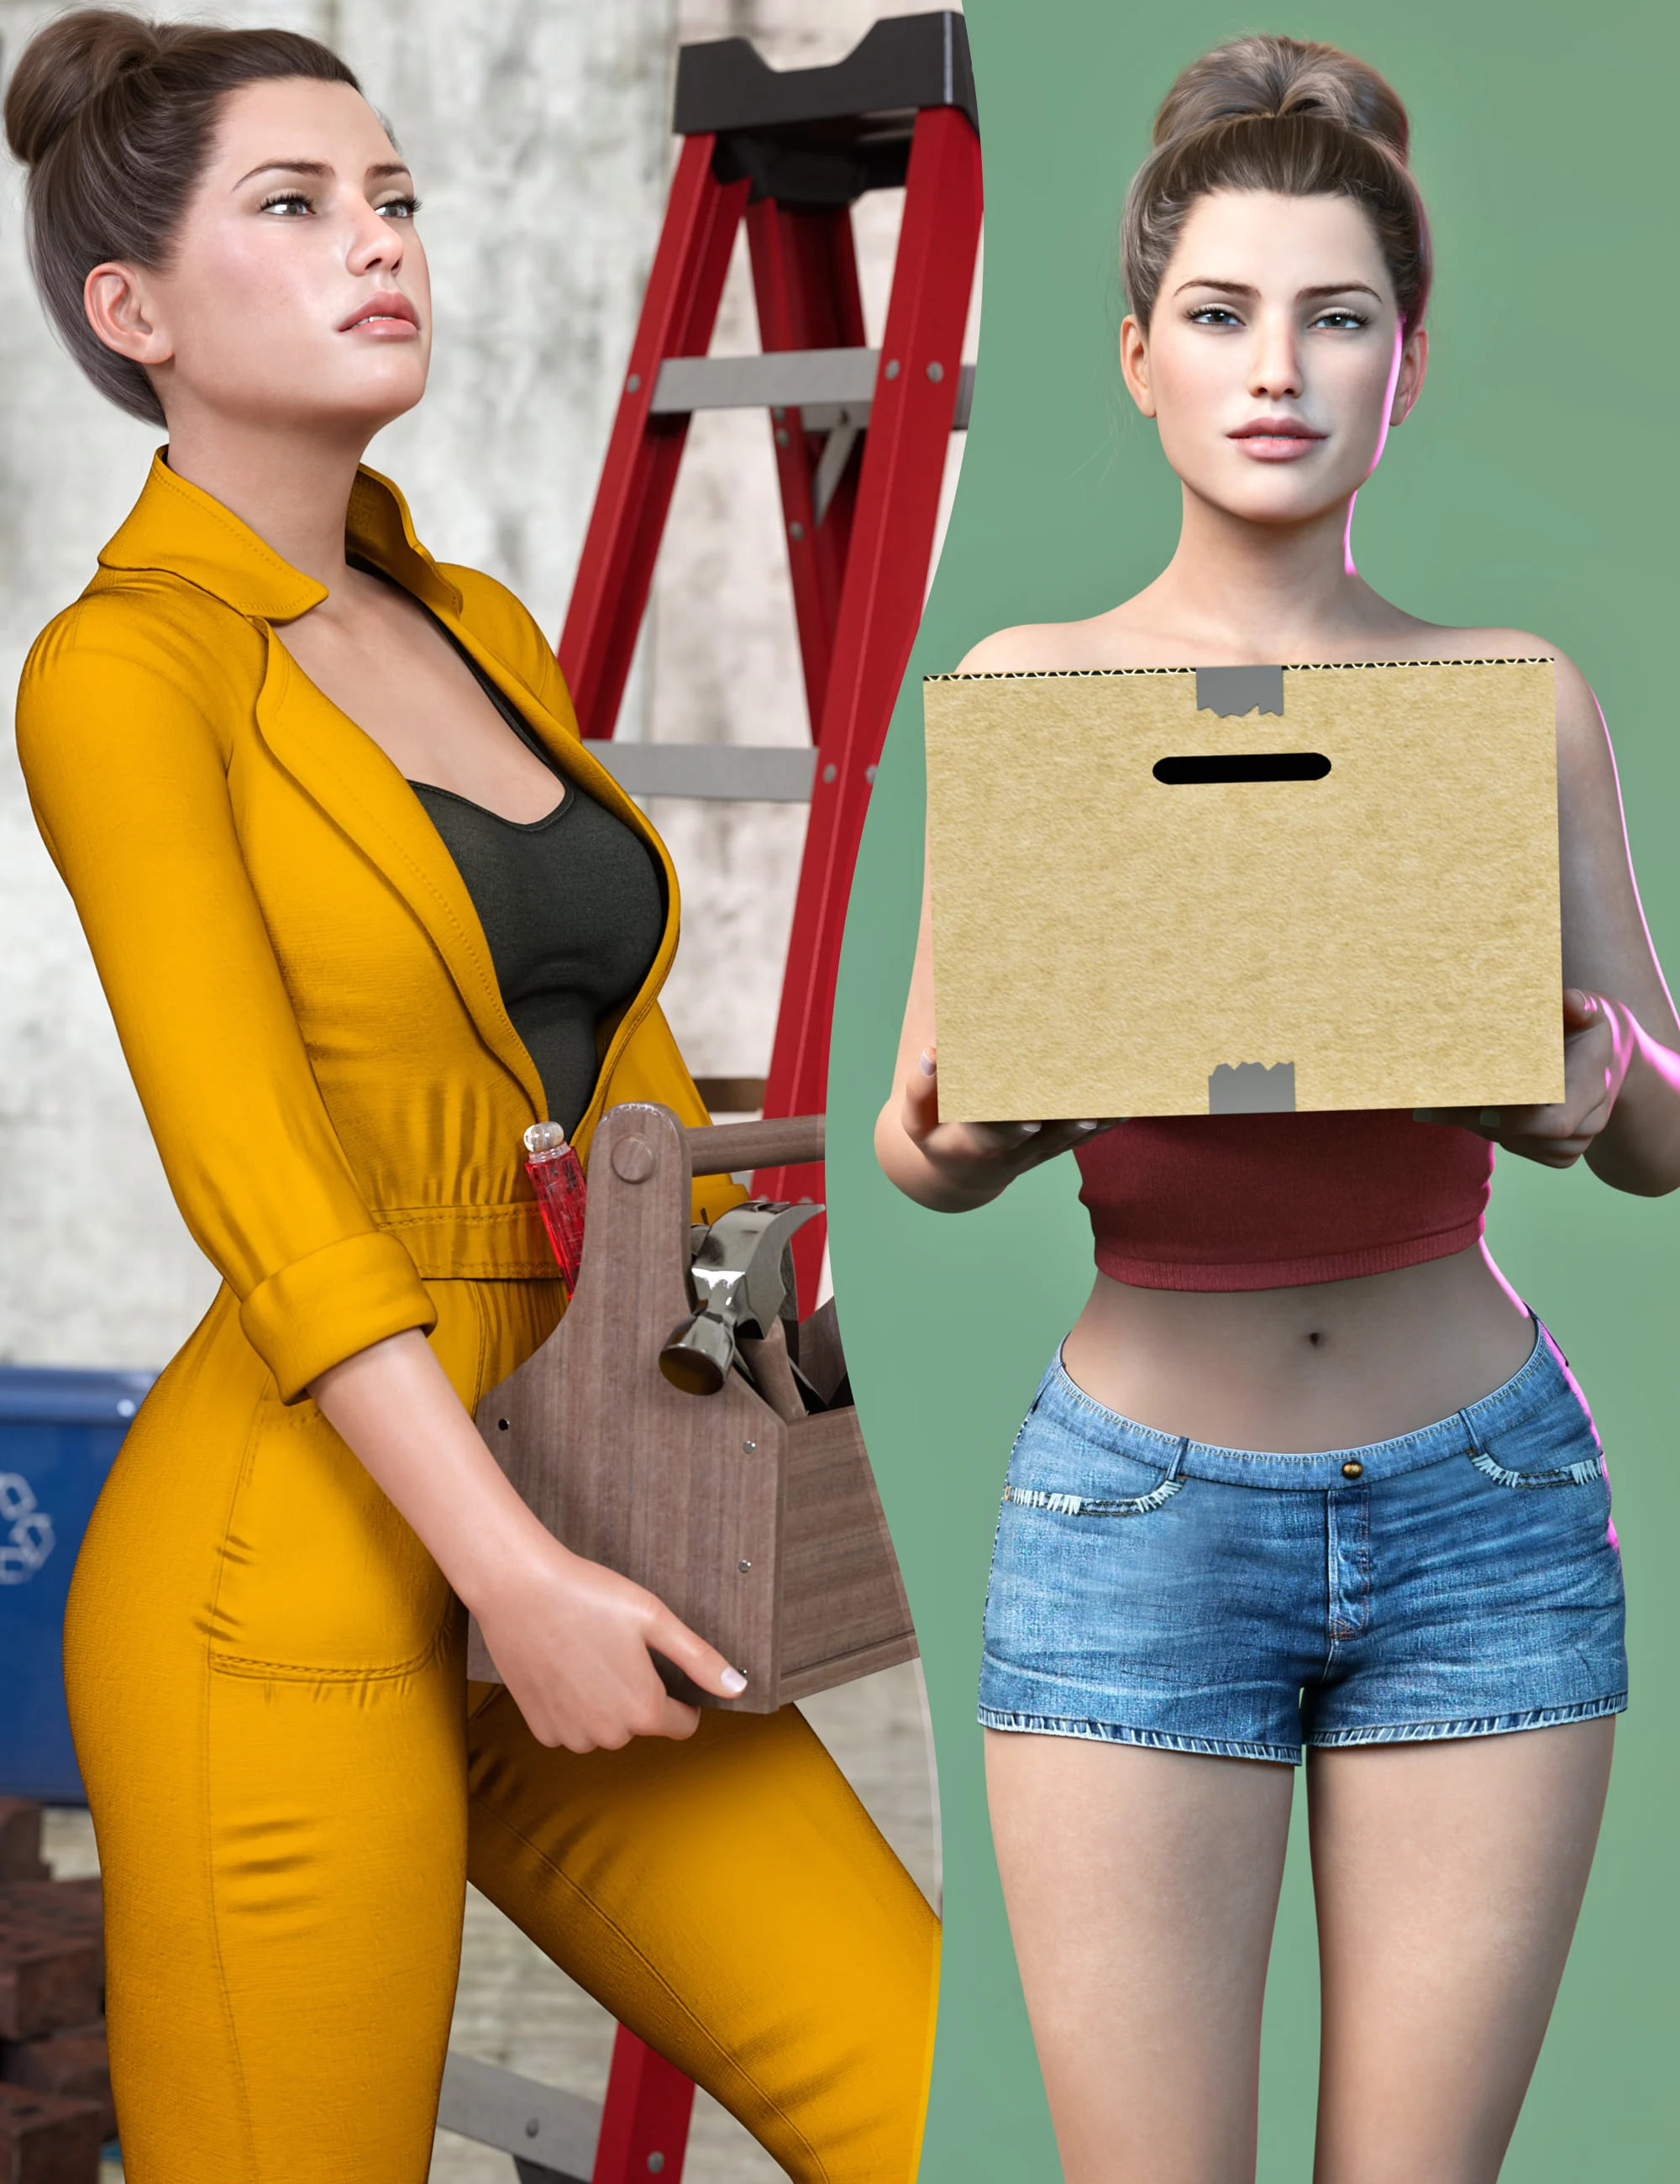 Z Lifting and Carrying Utility Pose Collection for Genesis 8 and 8.1_DAZ3DDL